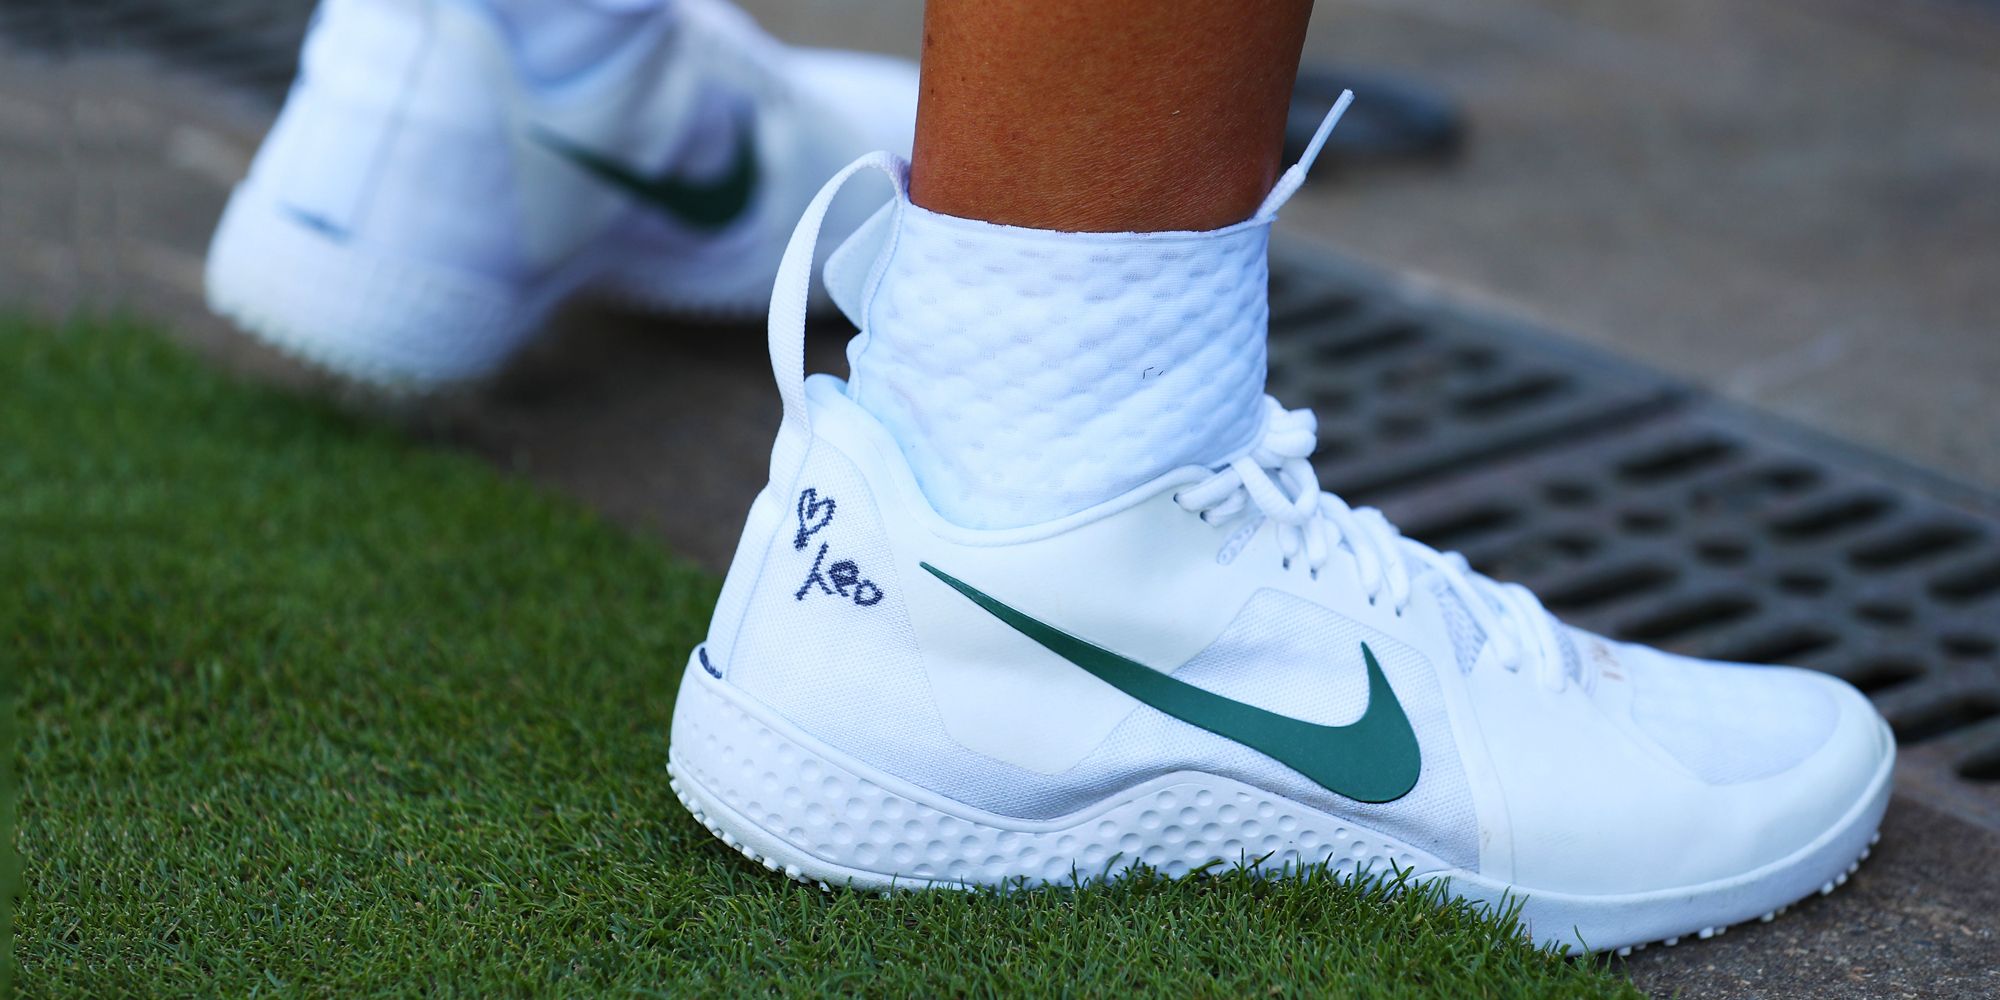 8 Best Tennis Shoes for Kids | A Buyer's Guide for Parents